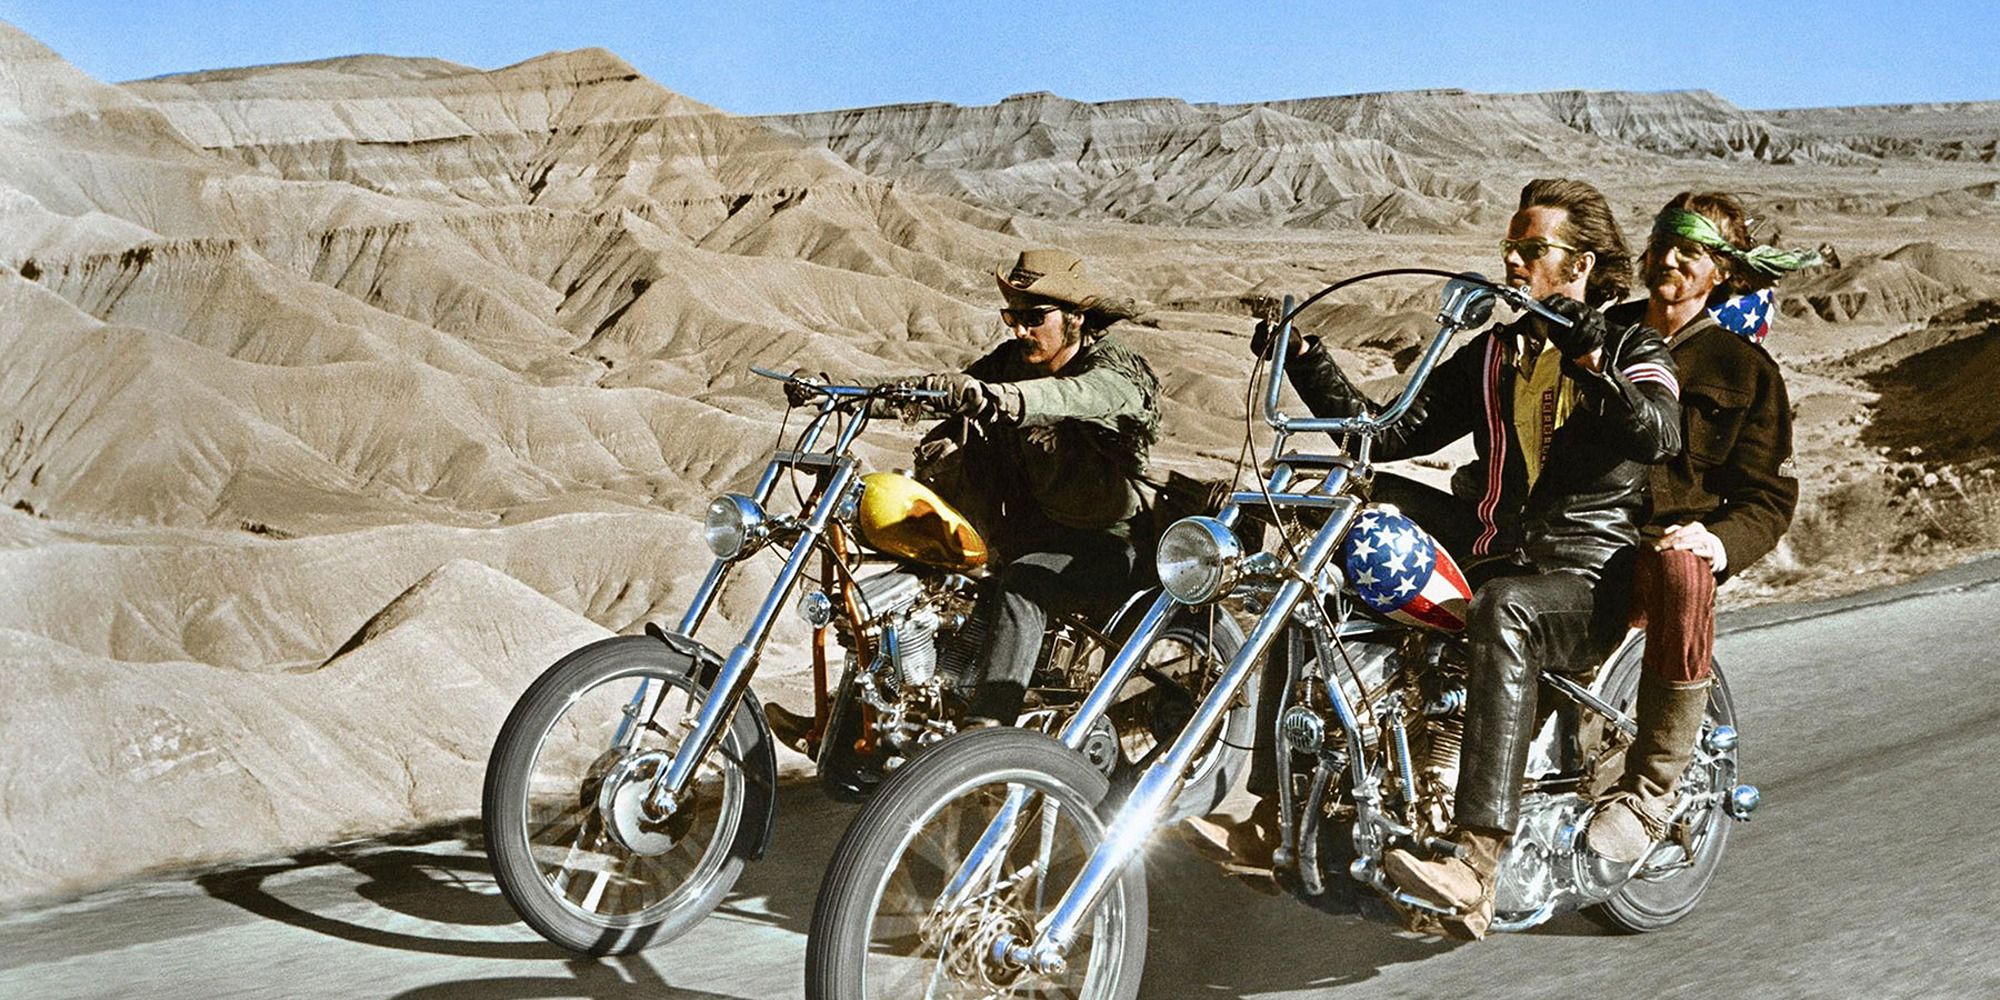 A man riding a motorcycle from Easy Rider down a highway in South America